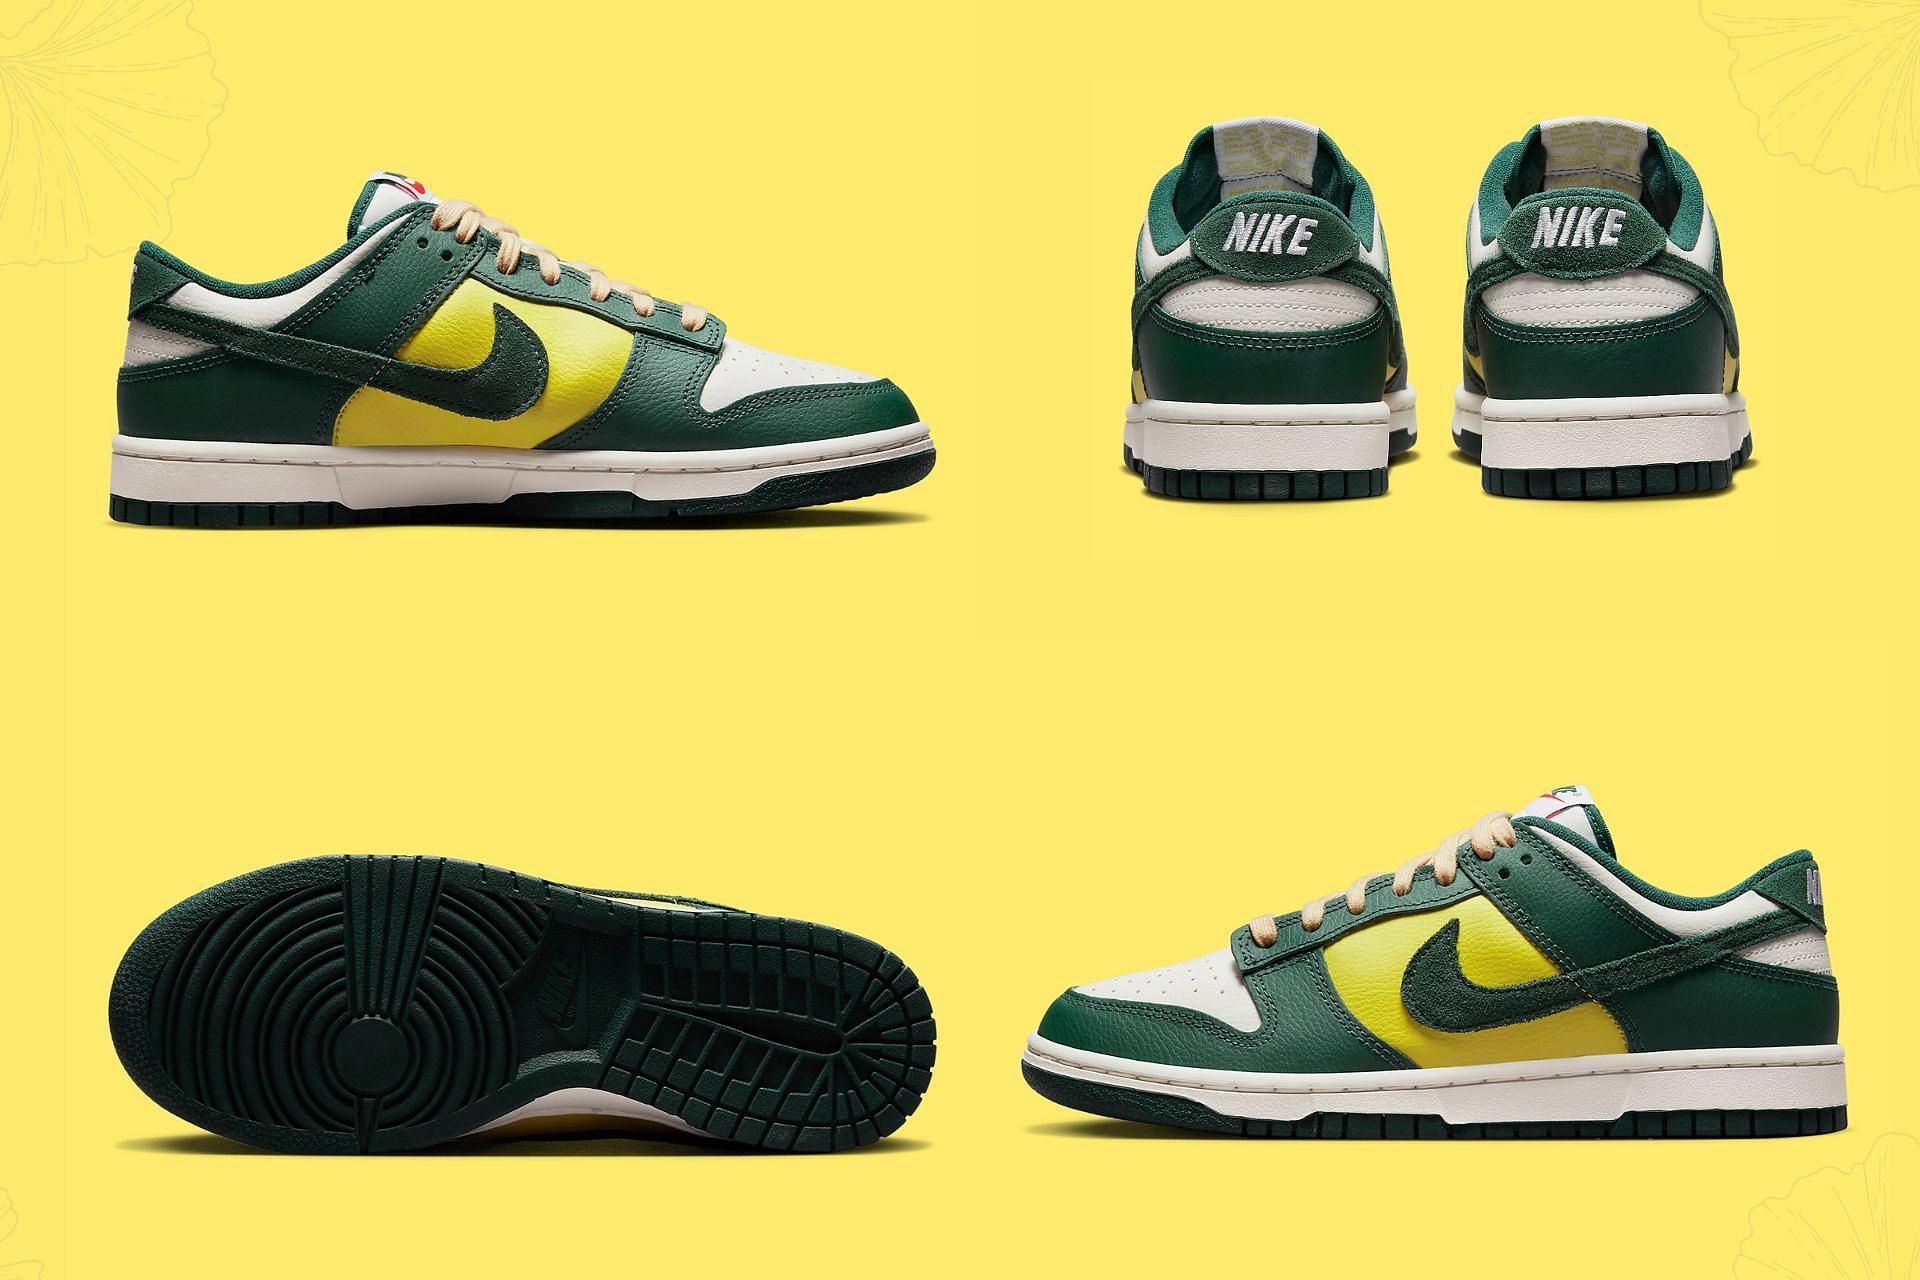 The upcoming Nike Dunk Low &quot;Noble Green&quot; sneakers is reminiscent of the Peter Moore-designed silhouette&rsquo;s &ldquo;Brazil&rdquo; colorway (Image via Sportskeeda)